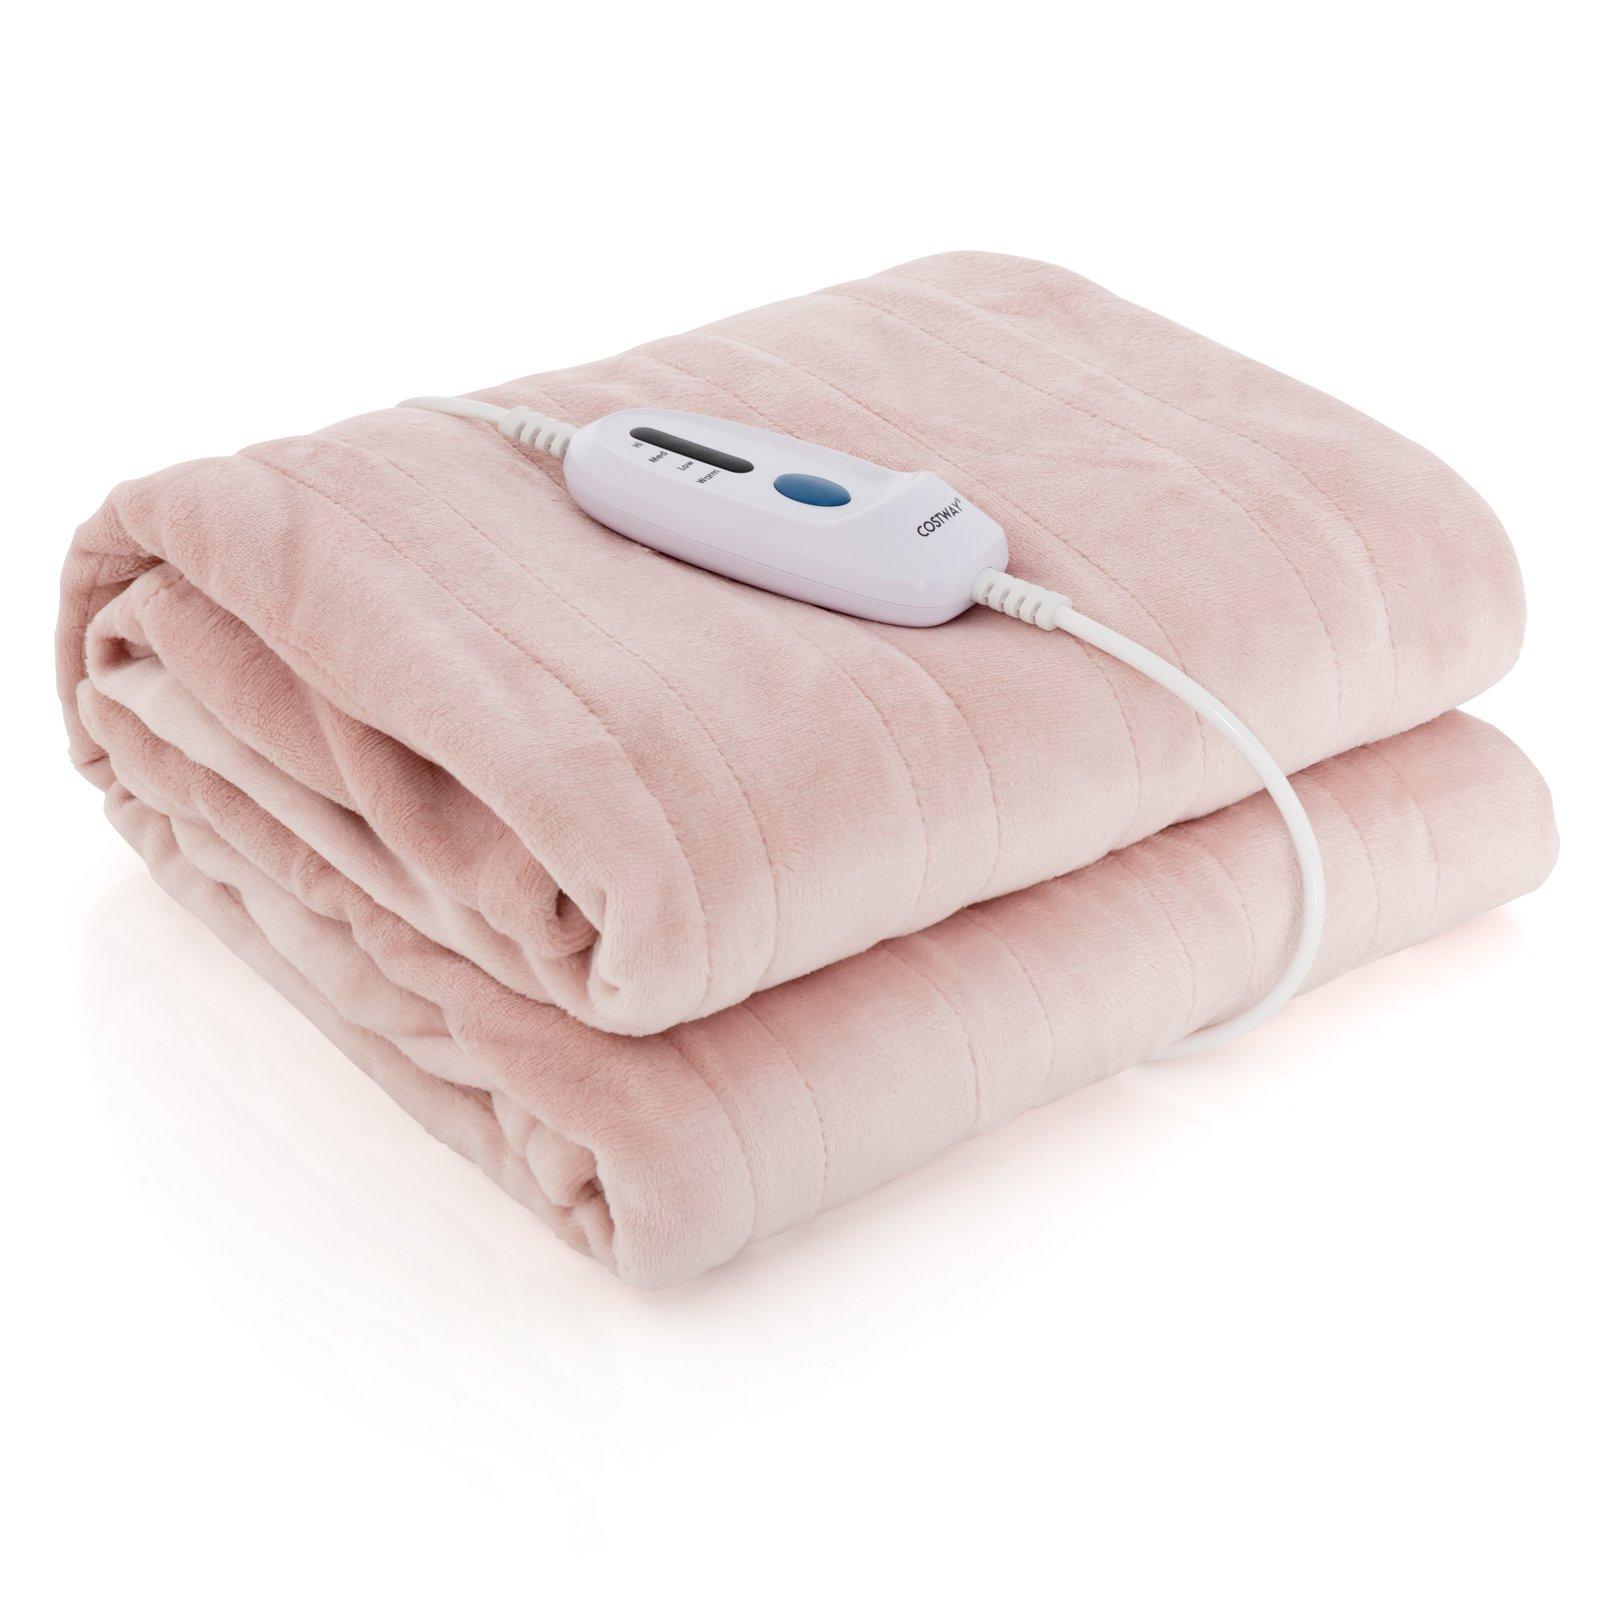 150 x 200 cm Electric Heated Blanket Heating Blanket Throw with 4 Heating Levels & 8 Hours Auto Off